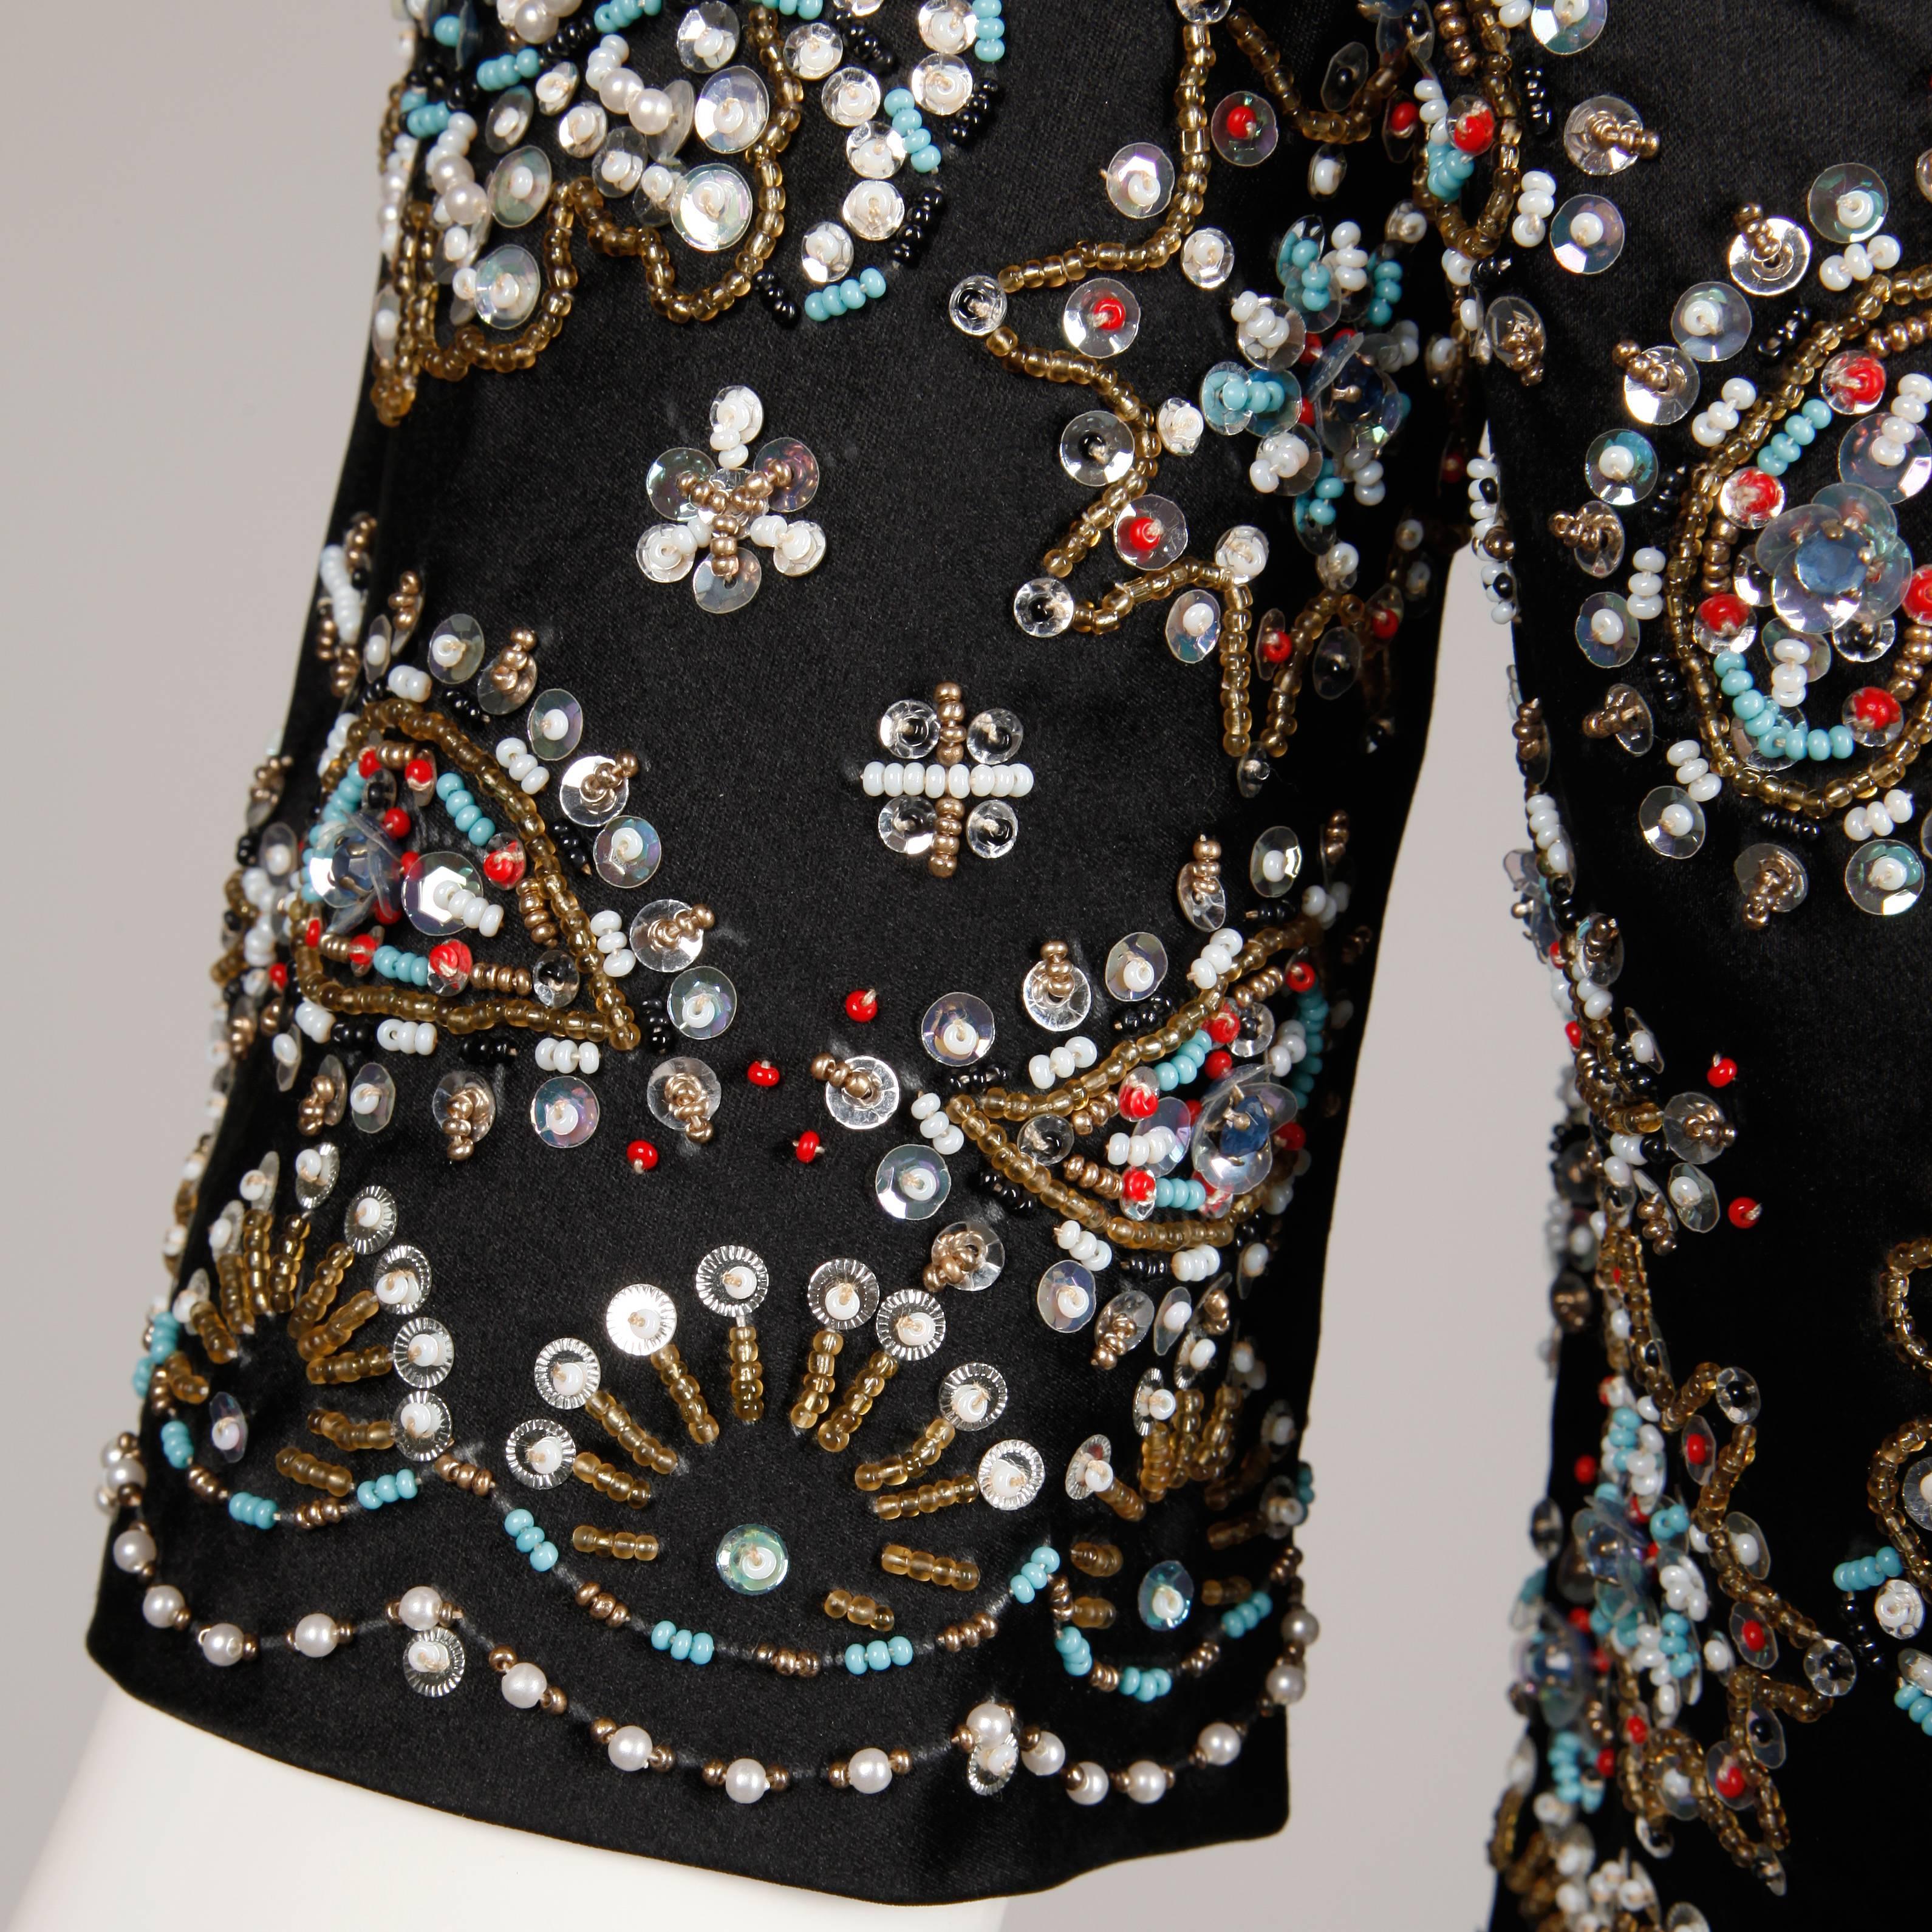 Gorgeous black silk satin bolero jacket with metallic multicolor beadwork and sequin embellishment. Fully lined with front hook closure. Silk satin outer with rayon lining. The marked size is 8, but the jacket fits like a modern size small. The bust